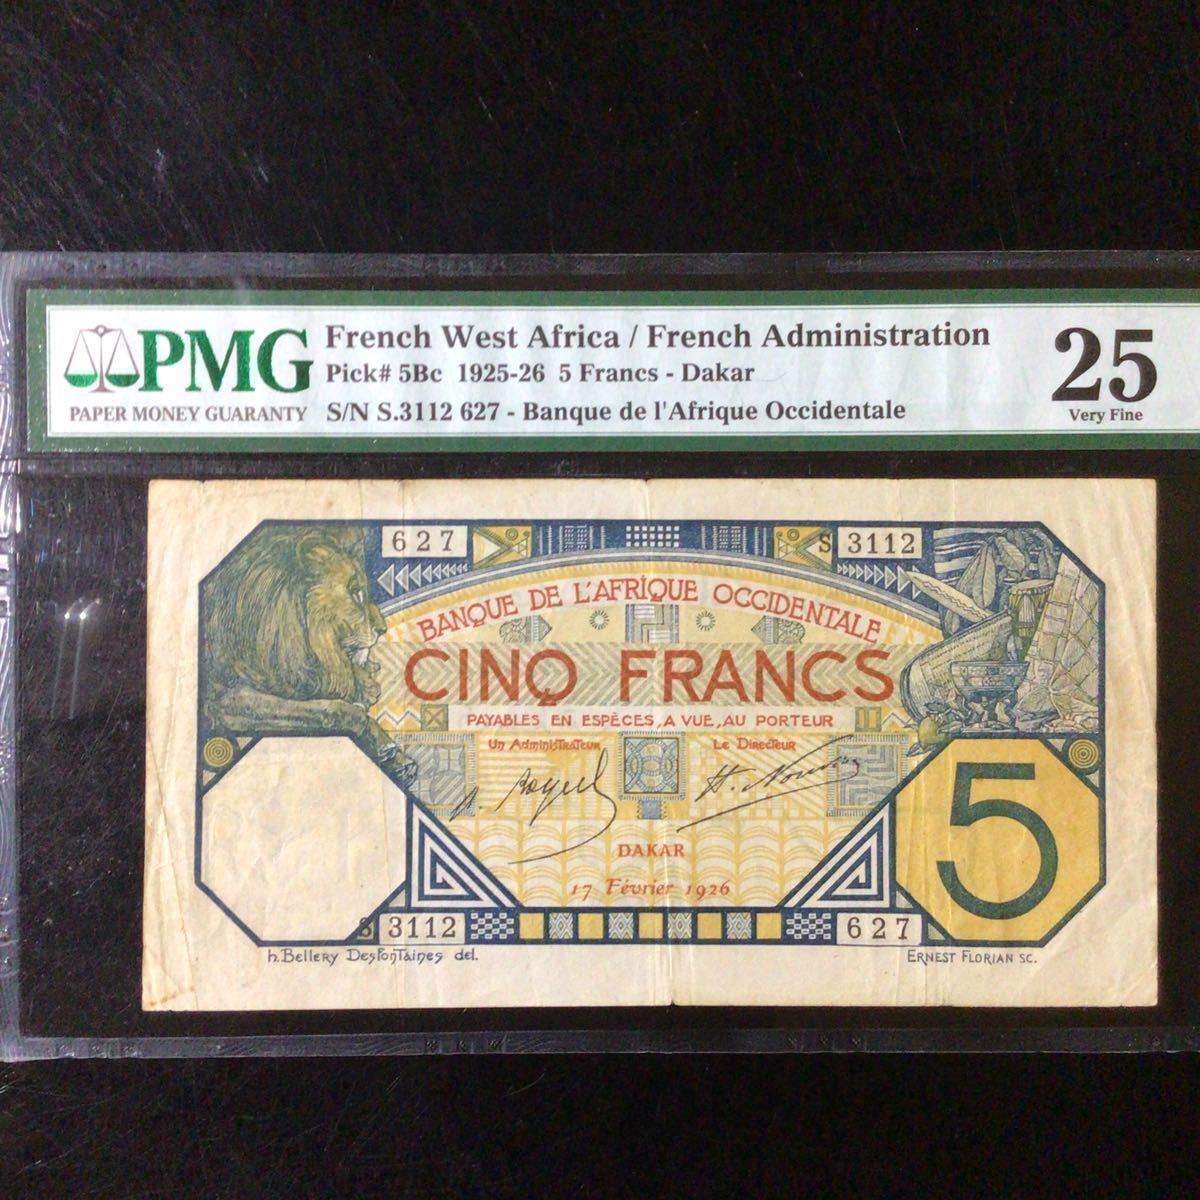 World Banknote Grading FRENCH WEST AFRICA《French Administration》5 Francs【1926】『PMG Grading Very Fine 25』